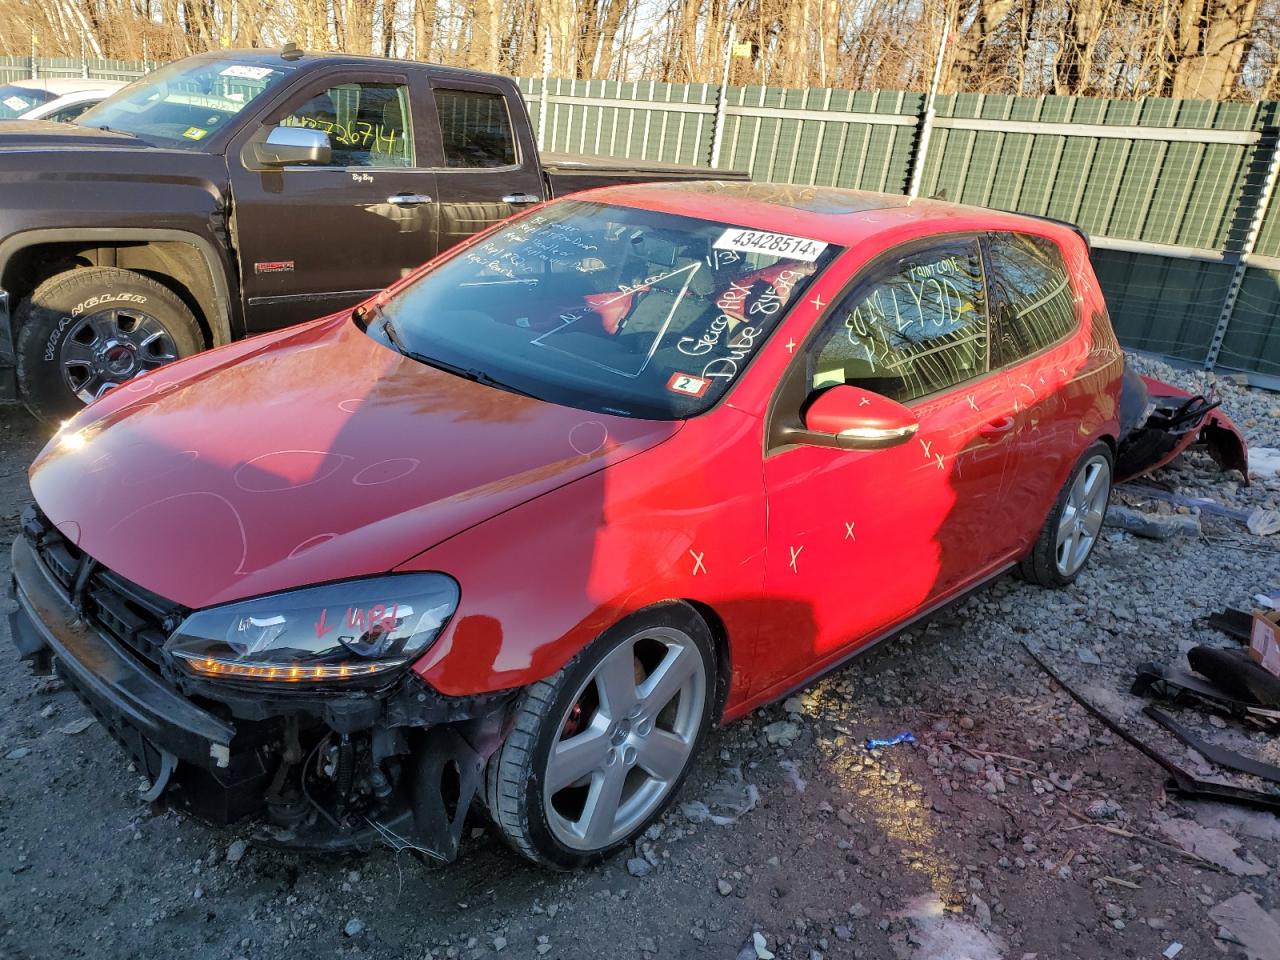 vin: WVWED7AJ0BW243365 WVWED7AJ0BW243365 2011 volkswagen gti 2000 for Sale in 03034 2111, Nh - Candia, Candia, USA